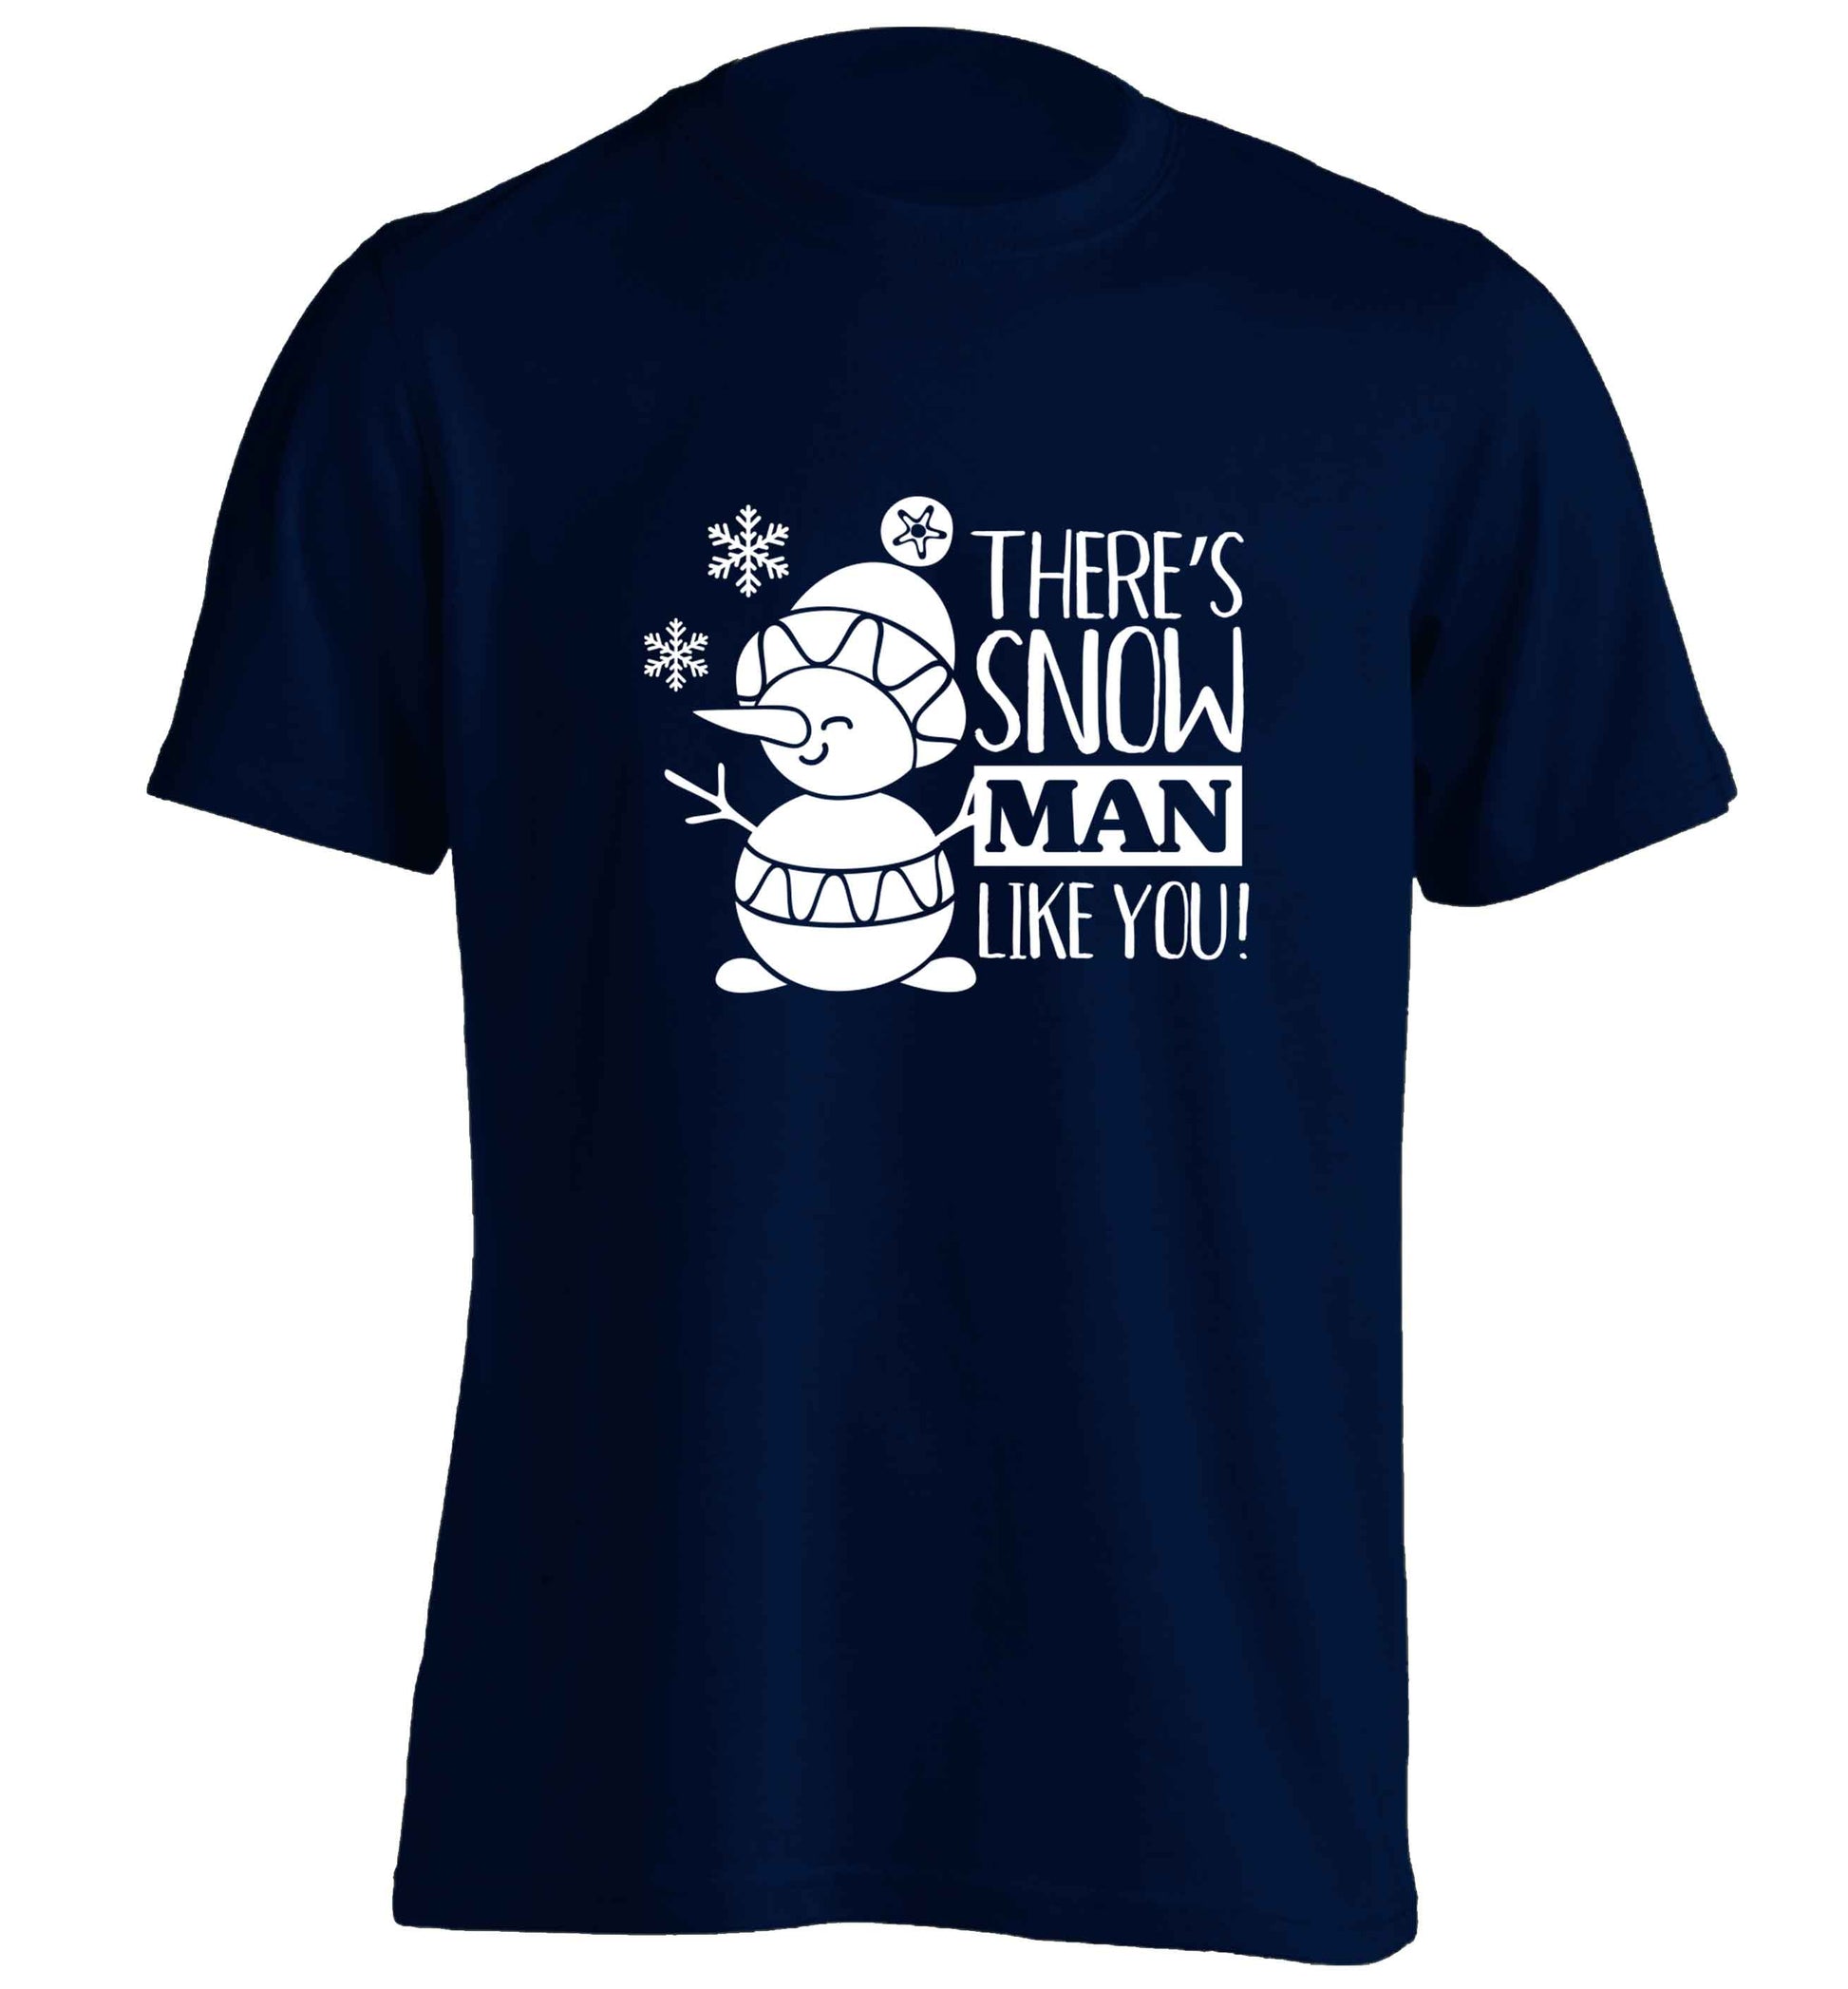 There's snow man like you adults unisex navy Tshirt 2XL